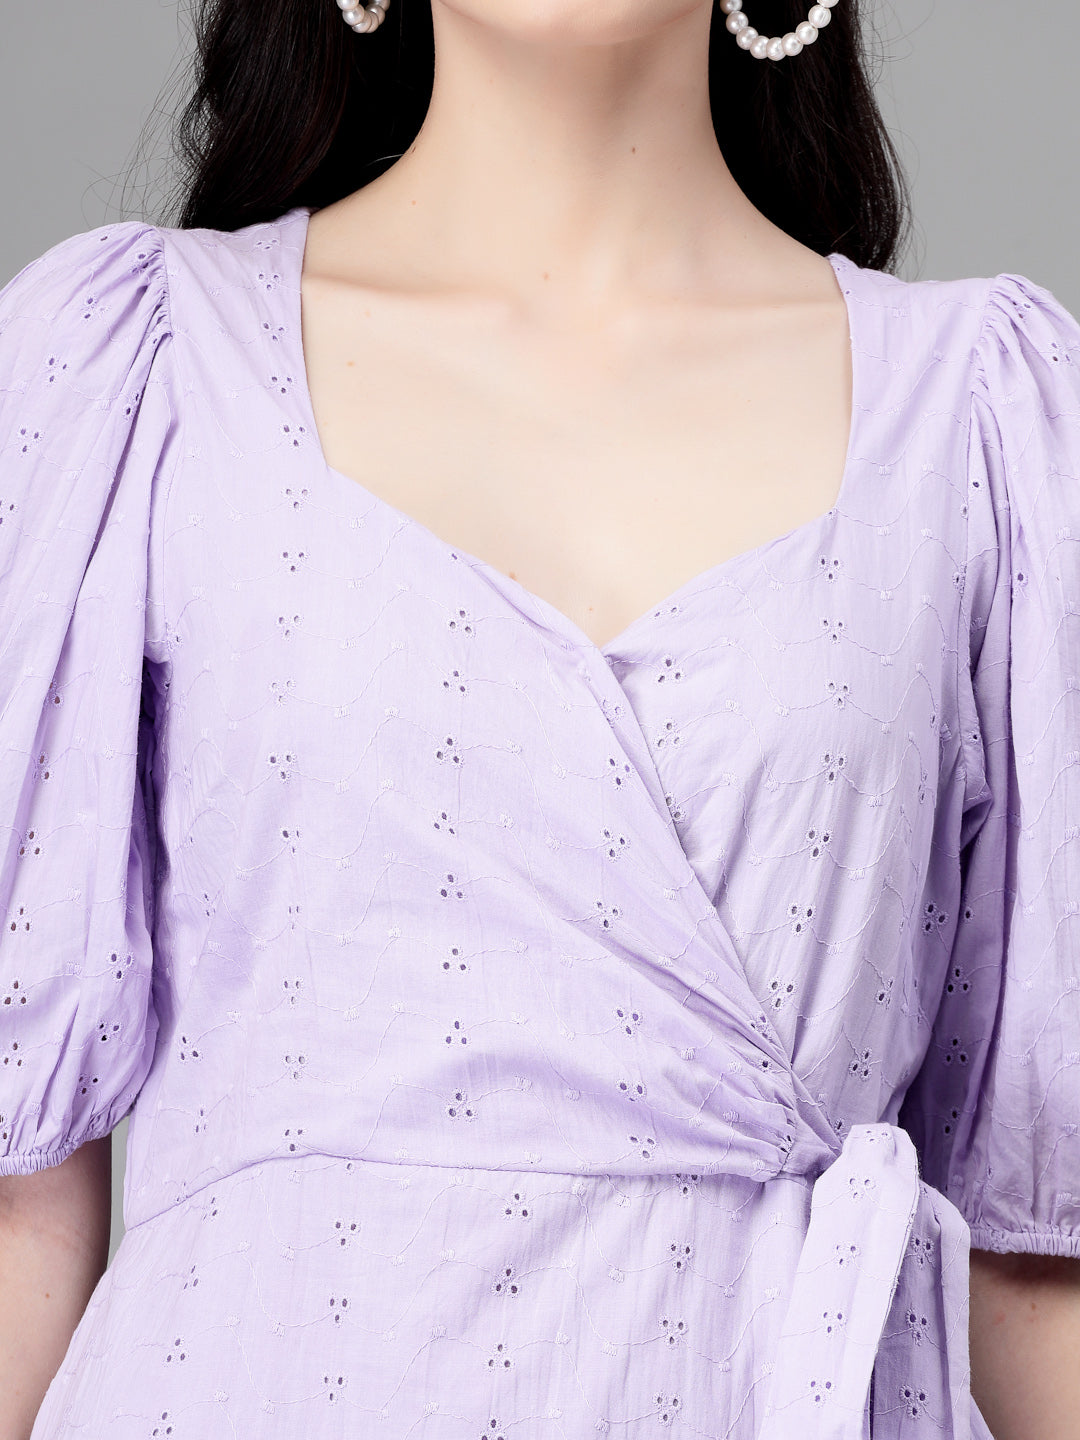 Women Lilac V Neck Embroidered Flared Dress